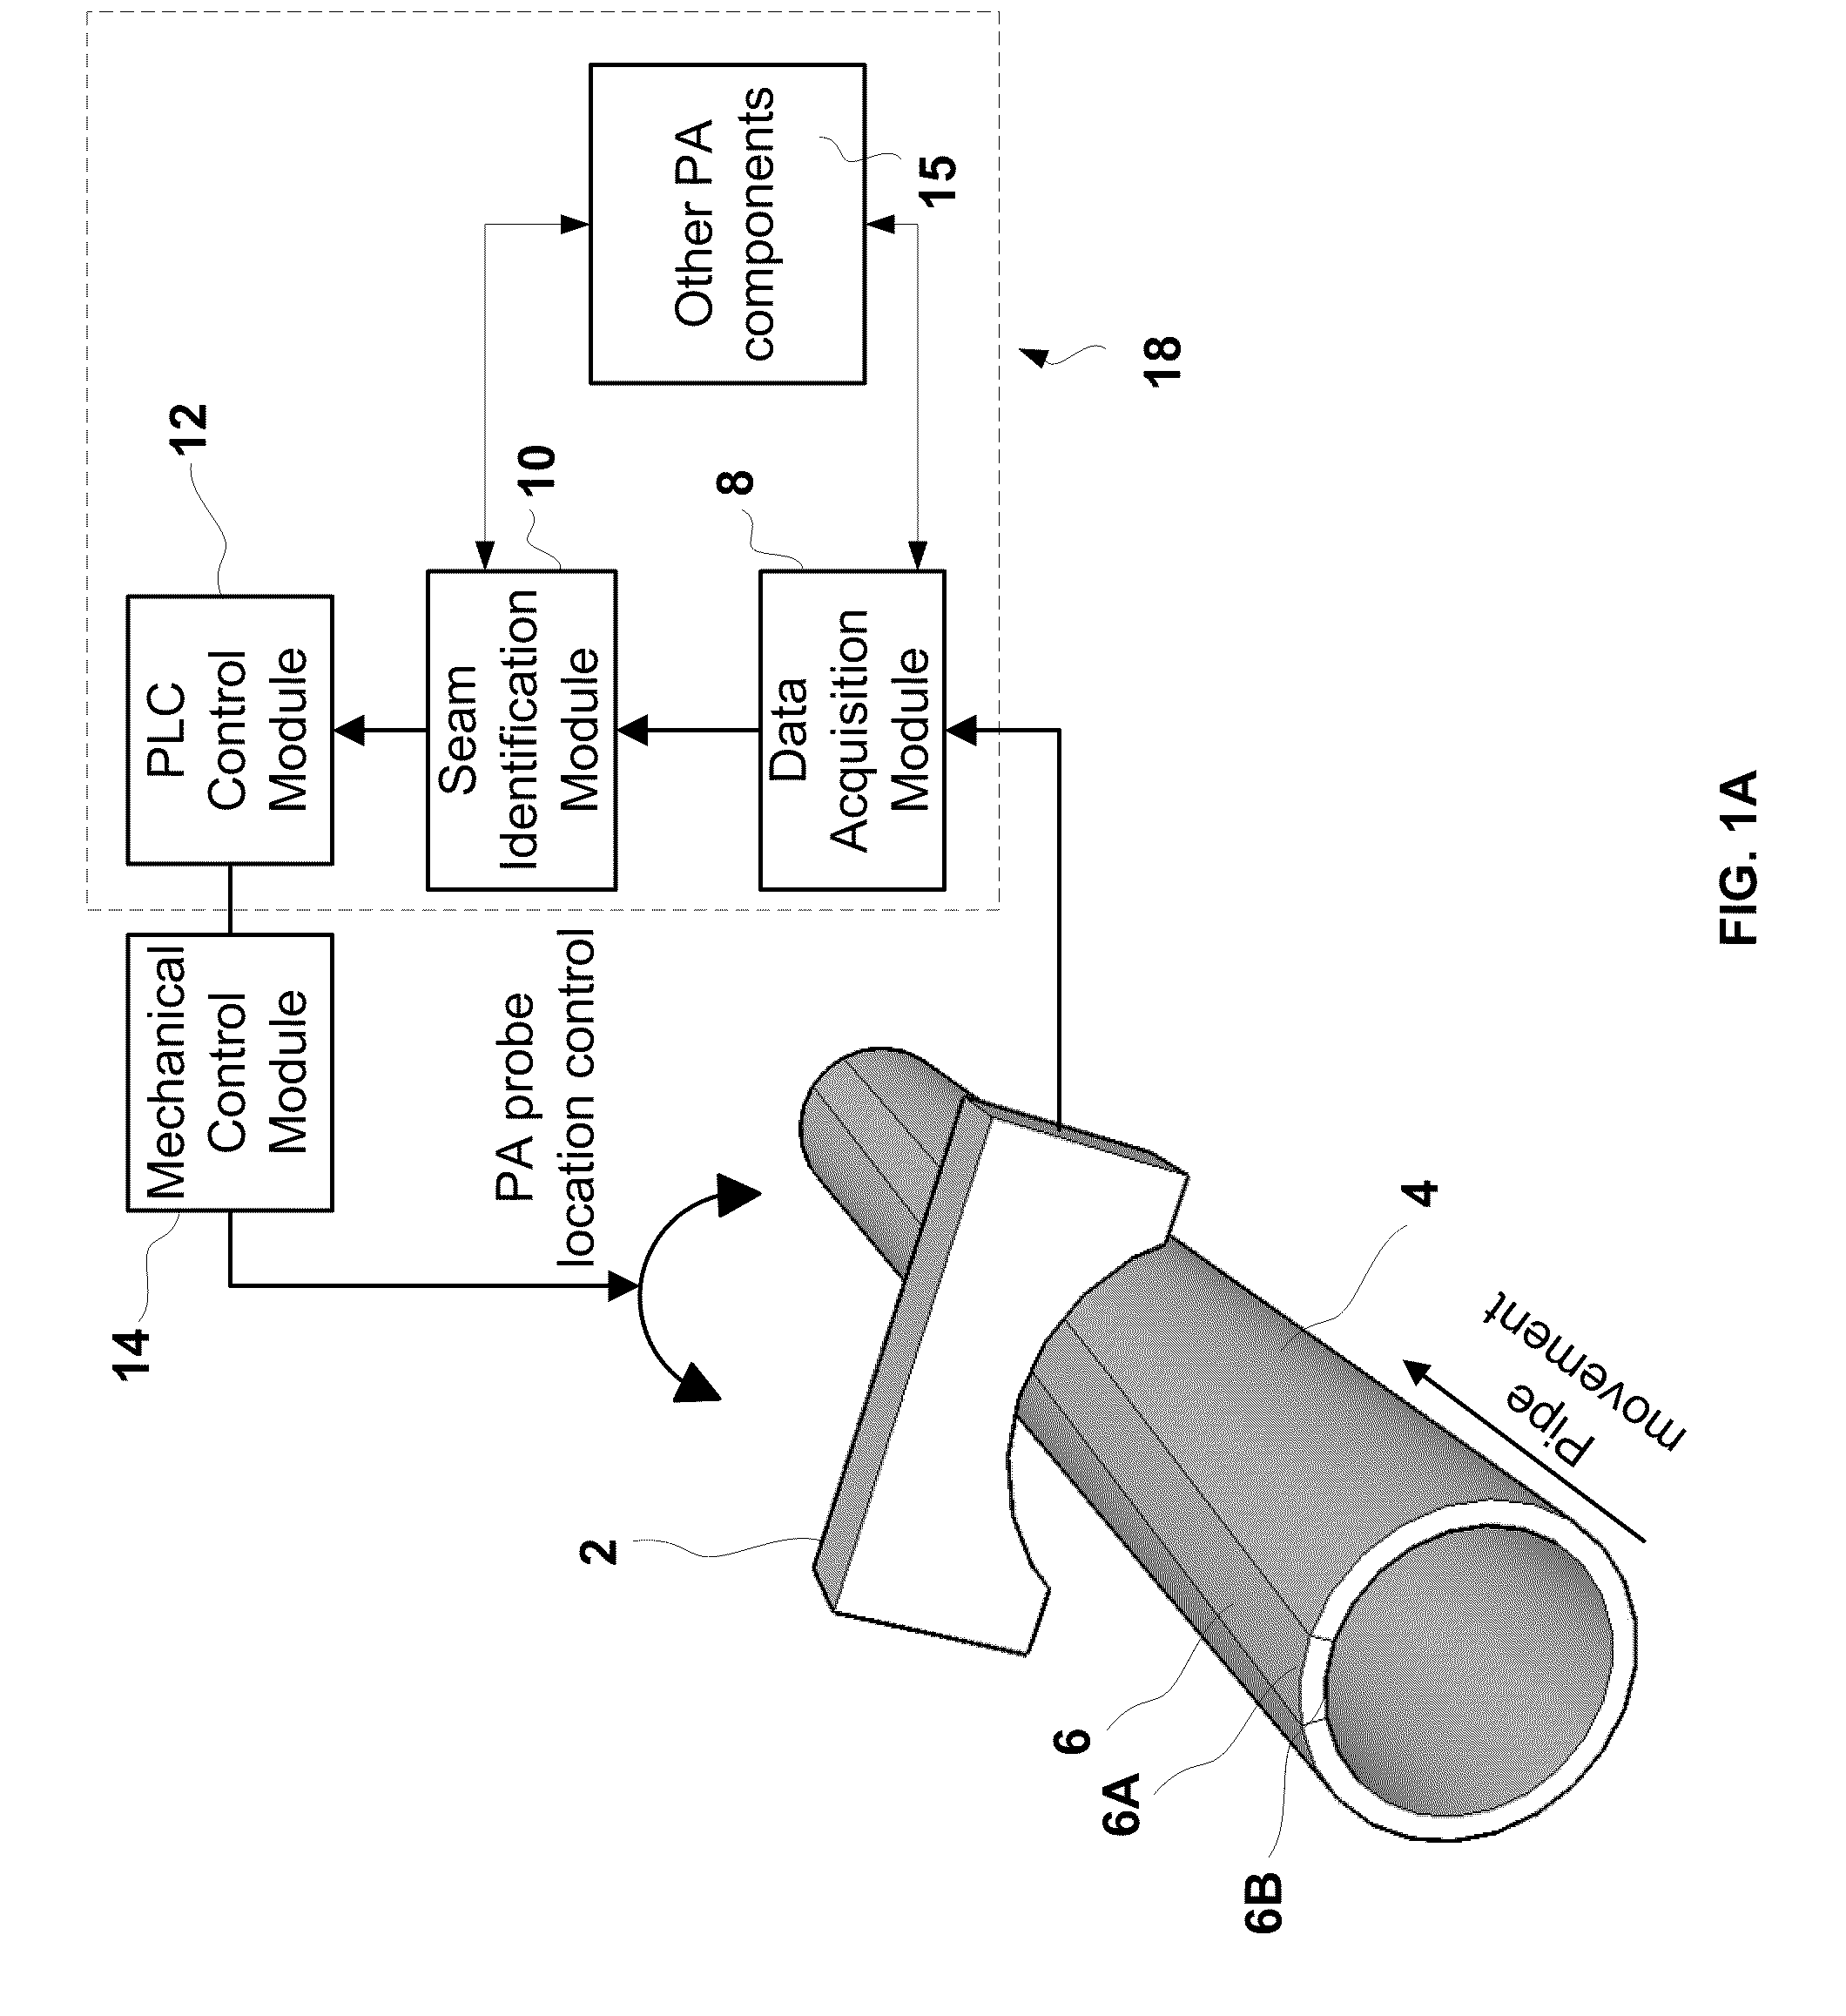 Weld seam tracking system using phased array ultrasonic devices